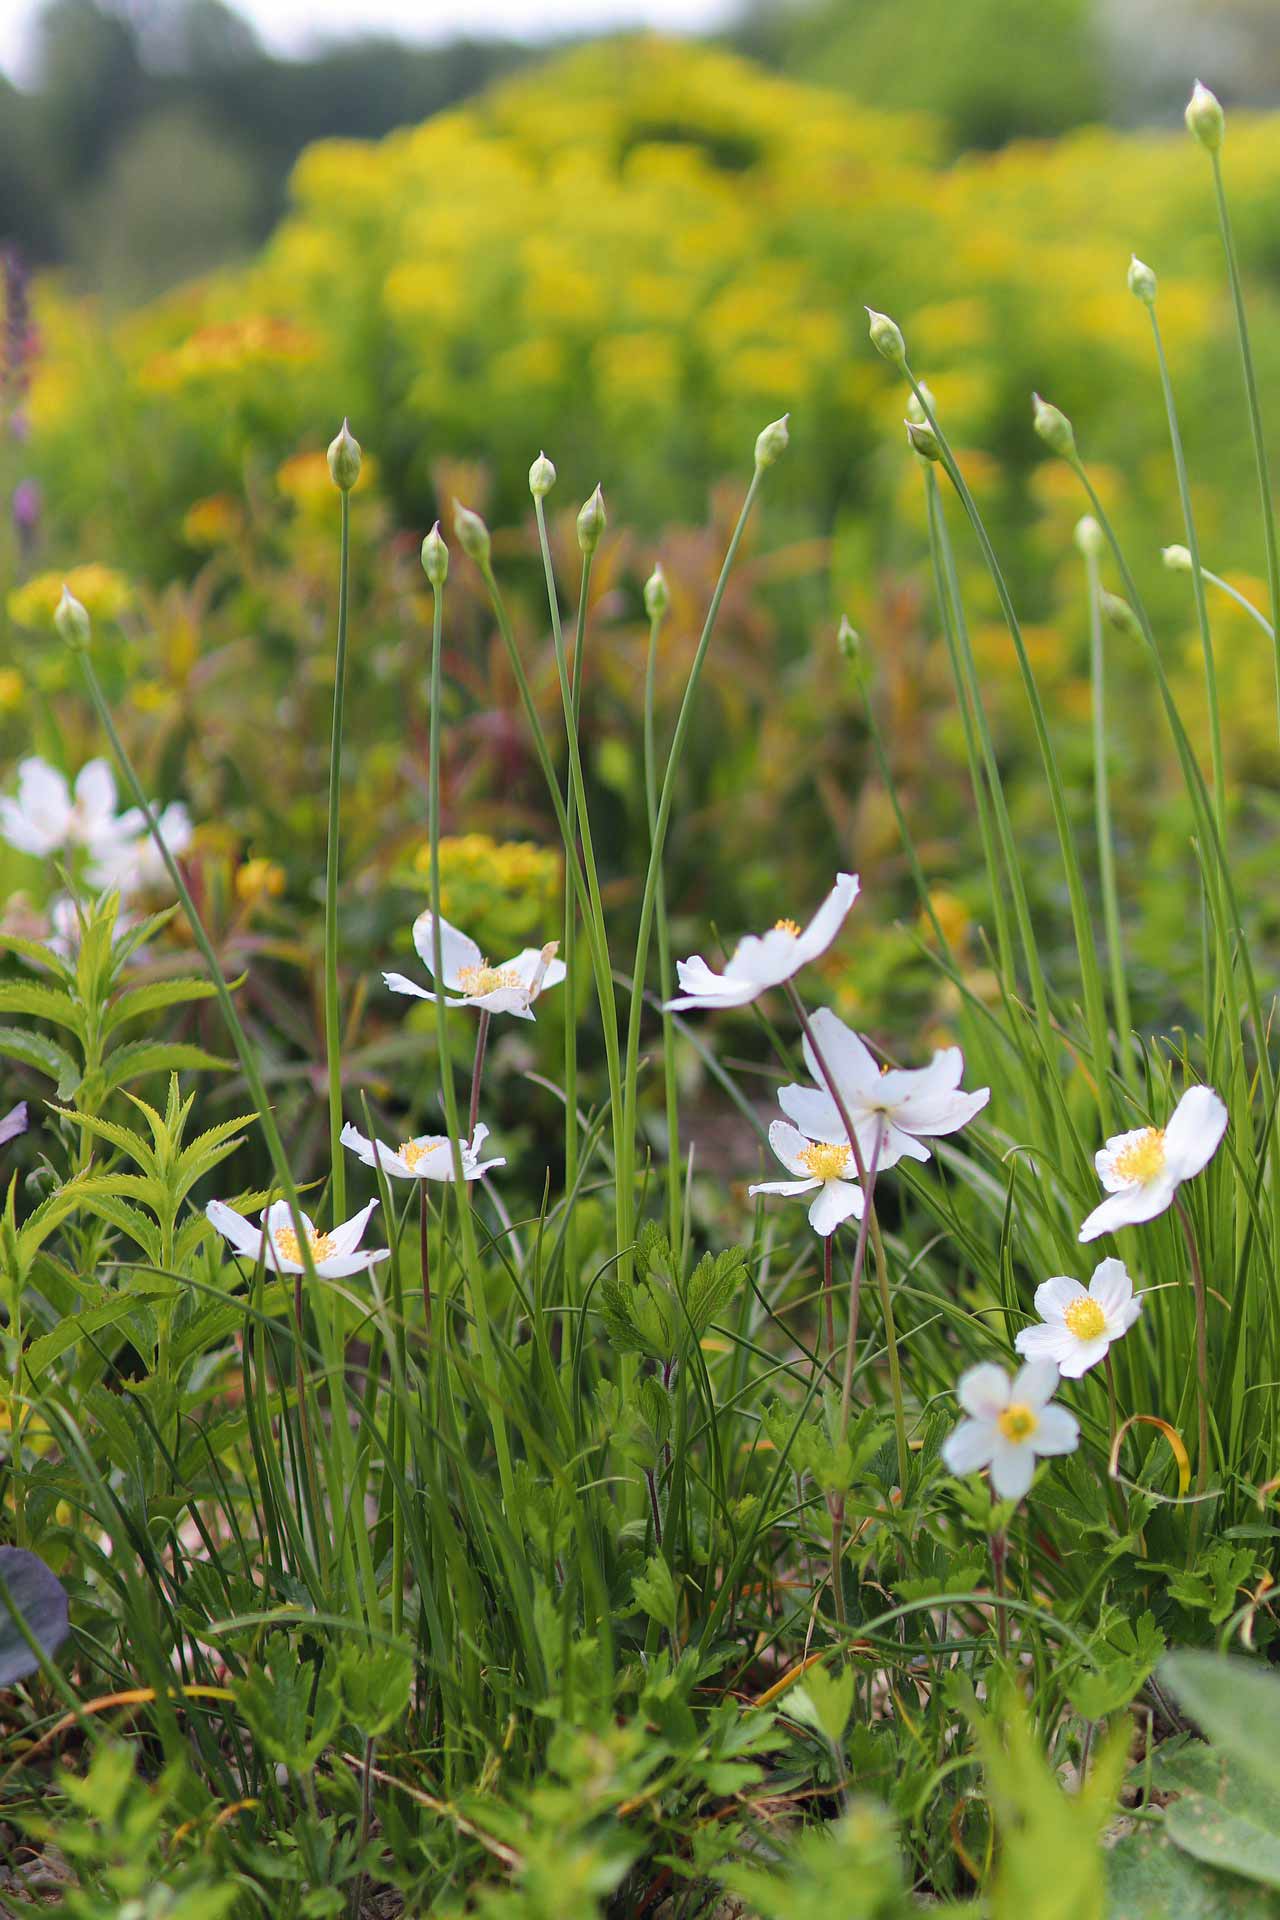 A beautiful photo of white anemones in the foreground and a blurred field in the background.